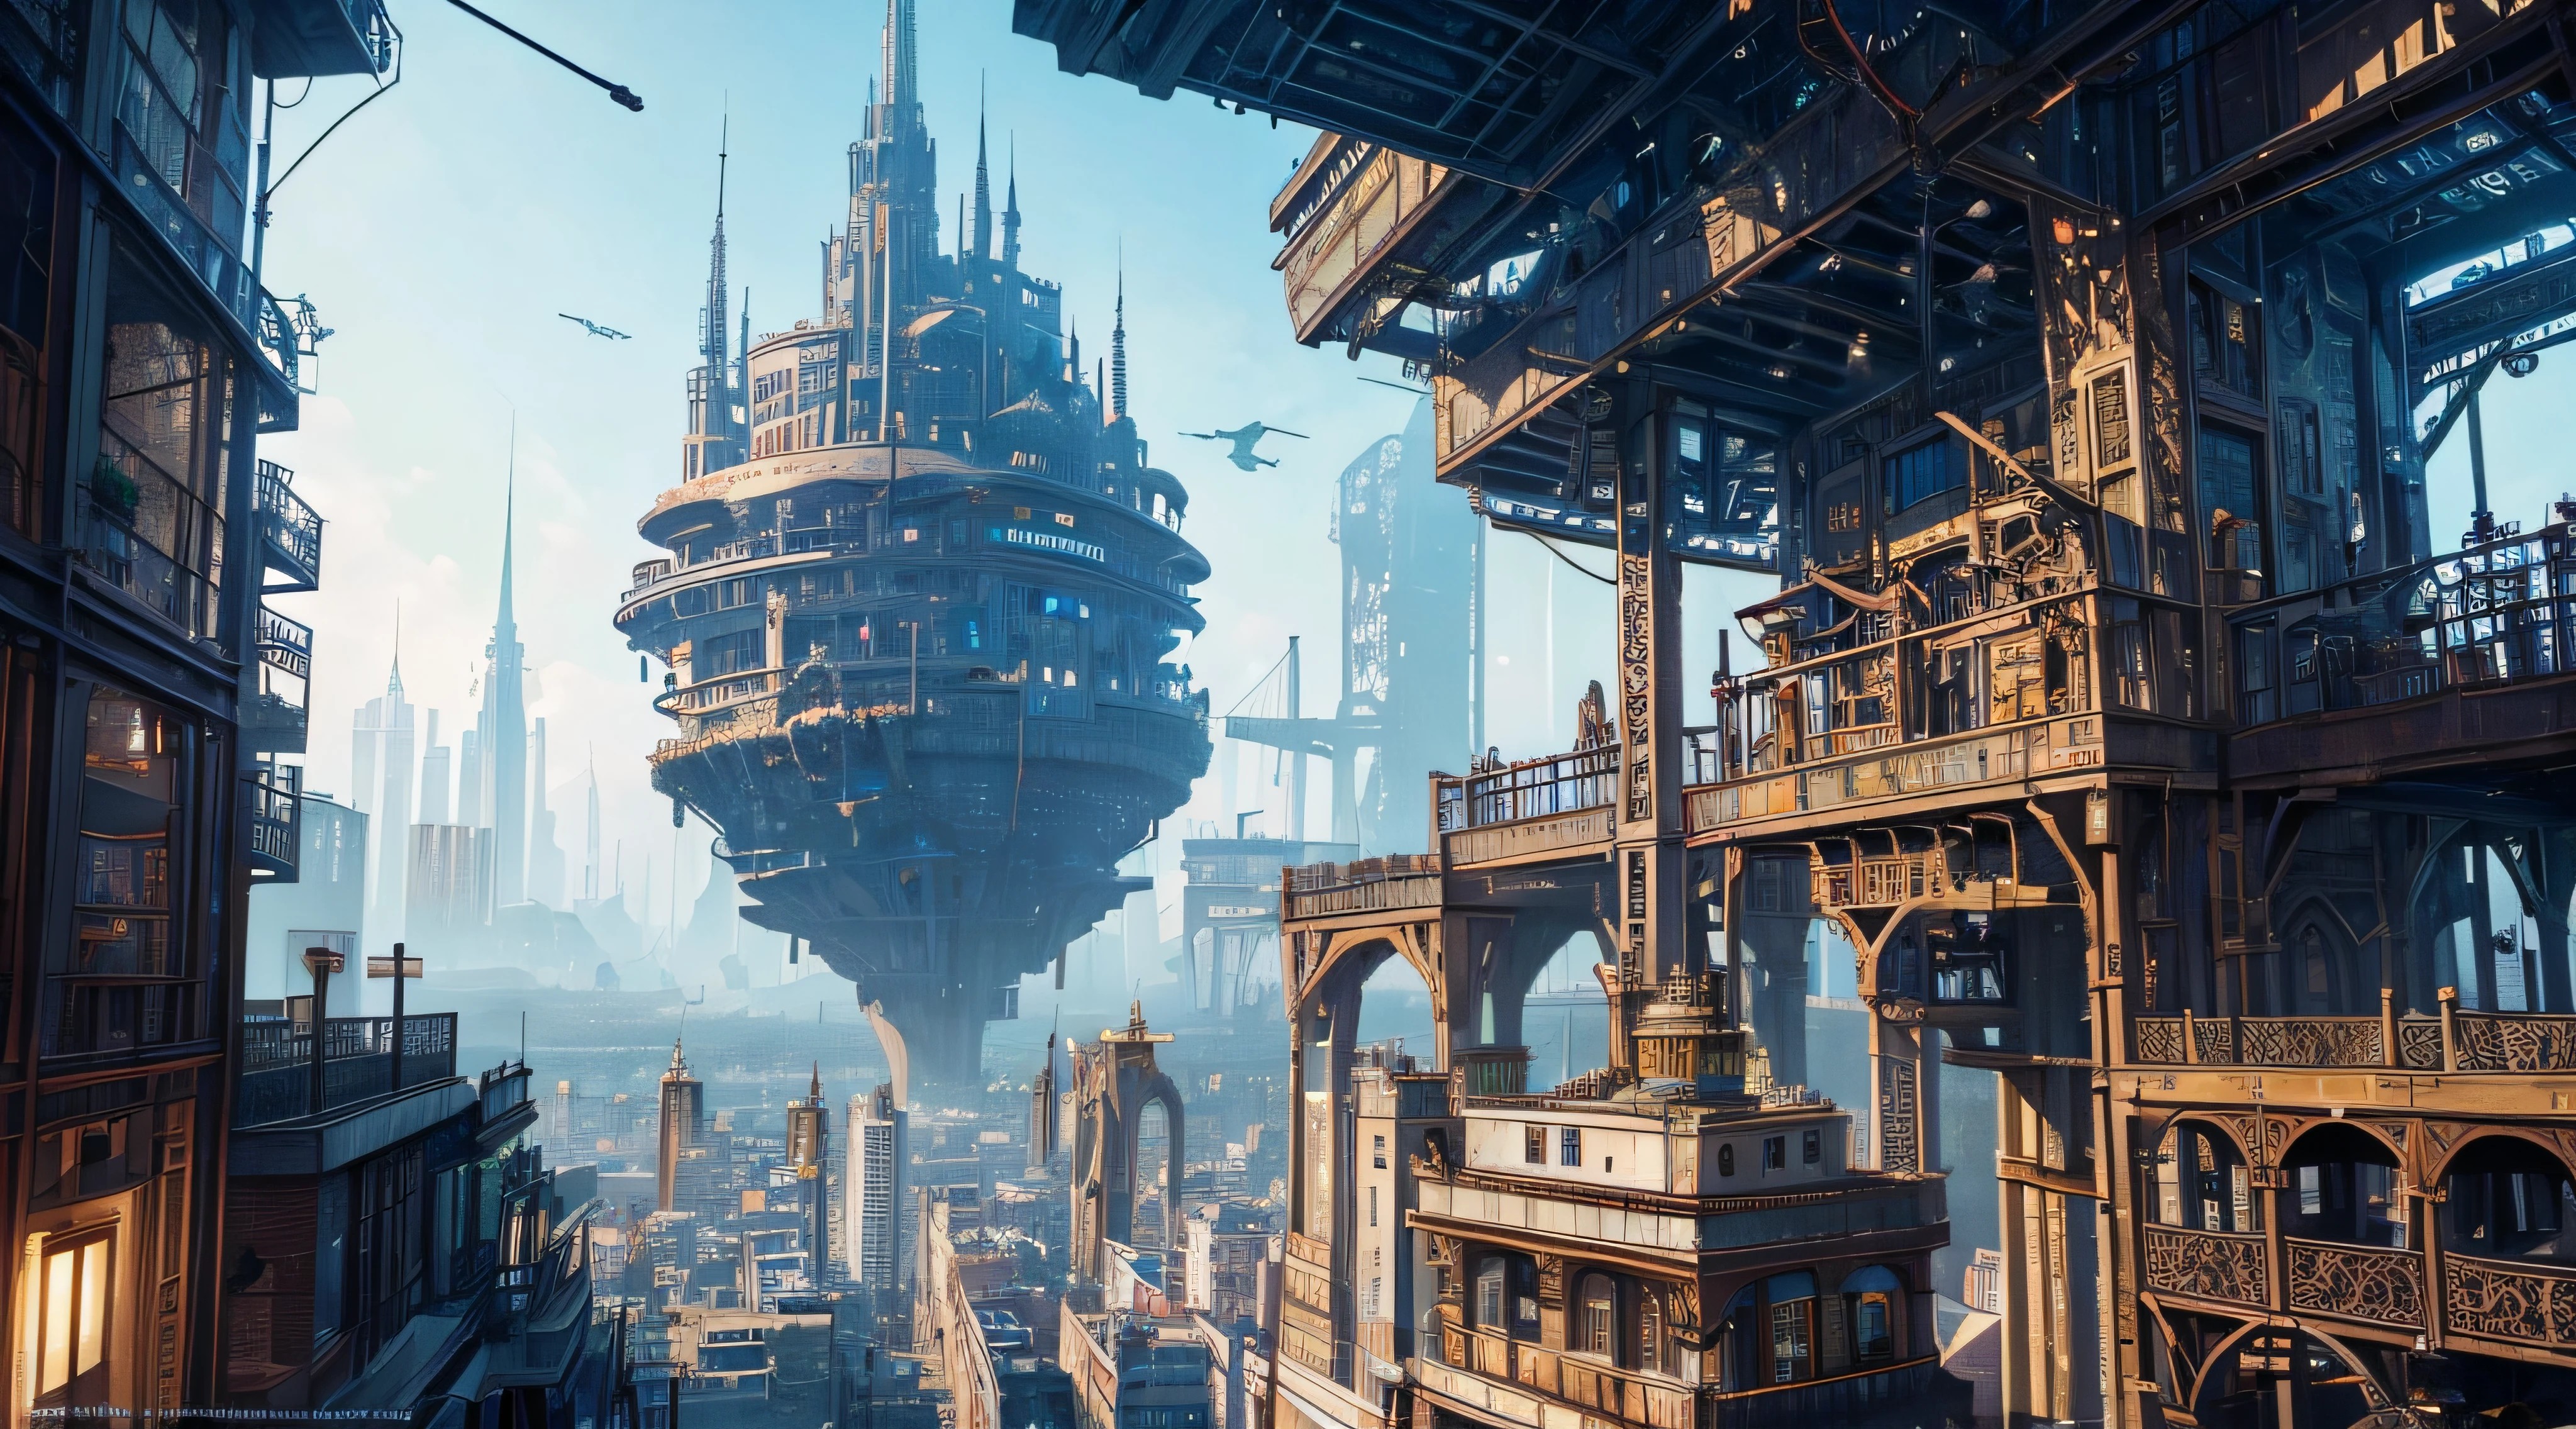 ((Best quality)), ((masterpiece)), (detailed),A vibrant and imaginative {digital painting} depicting a {fantasy cityscape} set in a {steampunk} world. The {city} should be filled with towering {mechanical structures} adorned with gears, pipes, and intricate details. The {streets} should be bustling with {flying airships} and {steam-powered vehicles}. The {color palette} should consist of {rich metallic tones} combined with pops of {bright and vivid colors}. The {art style} should be influenced by the works of {H.R. Giger} and {Hayao Miyazaki}, blending elements of {surrealism} and {cyberpunk}. The {camera} should capture the city from a {high angle} to showcase its sprawling complexity.

Art Inspirations: Art Station (steampunk artists), H.R. Giger, Hayao Miyazaki
Render Style: Surrealism, cyberpunk, vivid colors
Camera Shot: High angle
Camera Lens: Fish-eye lens
View: Overhead